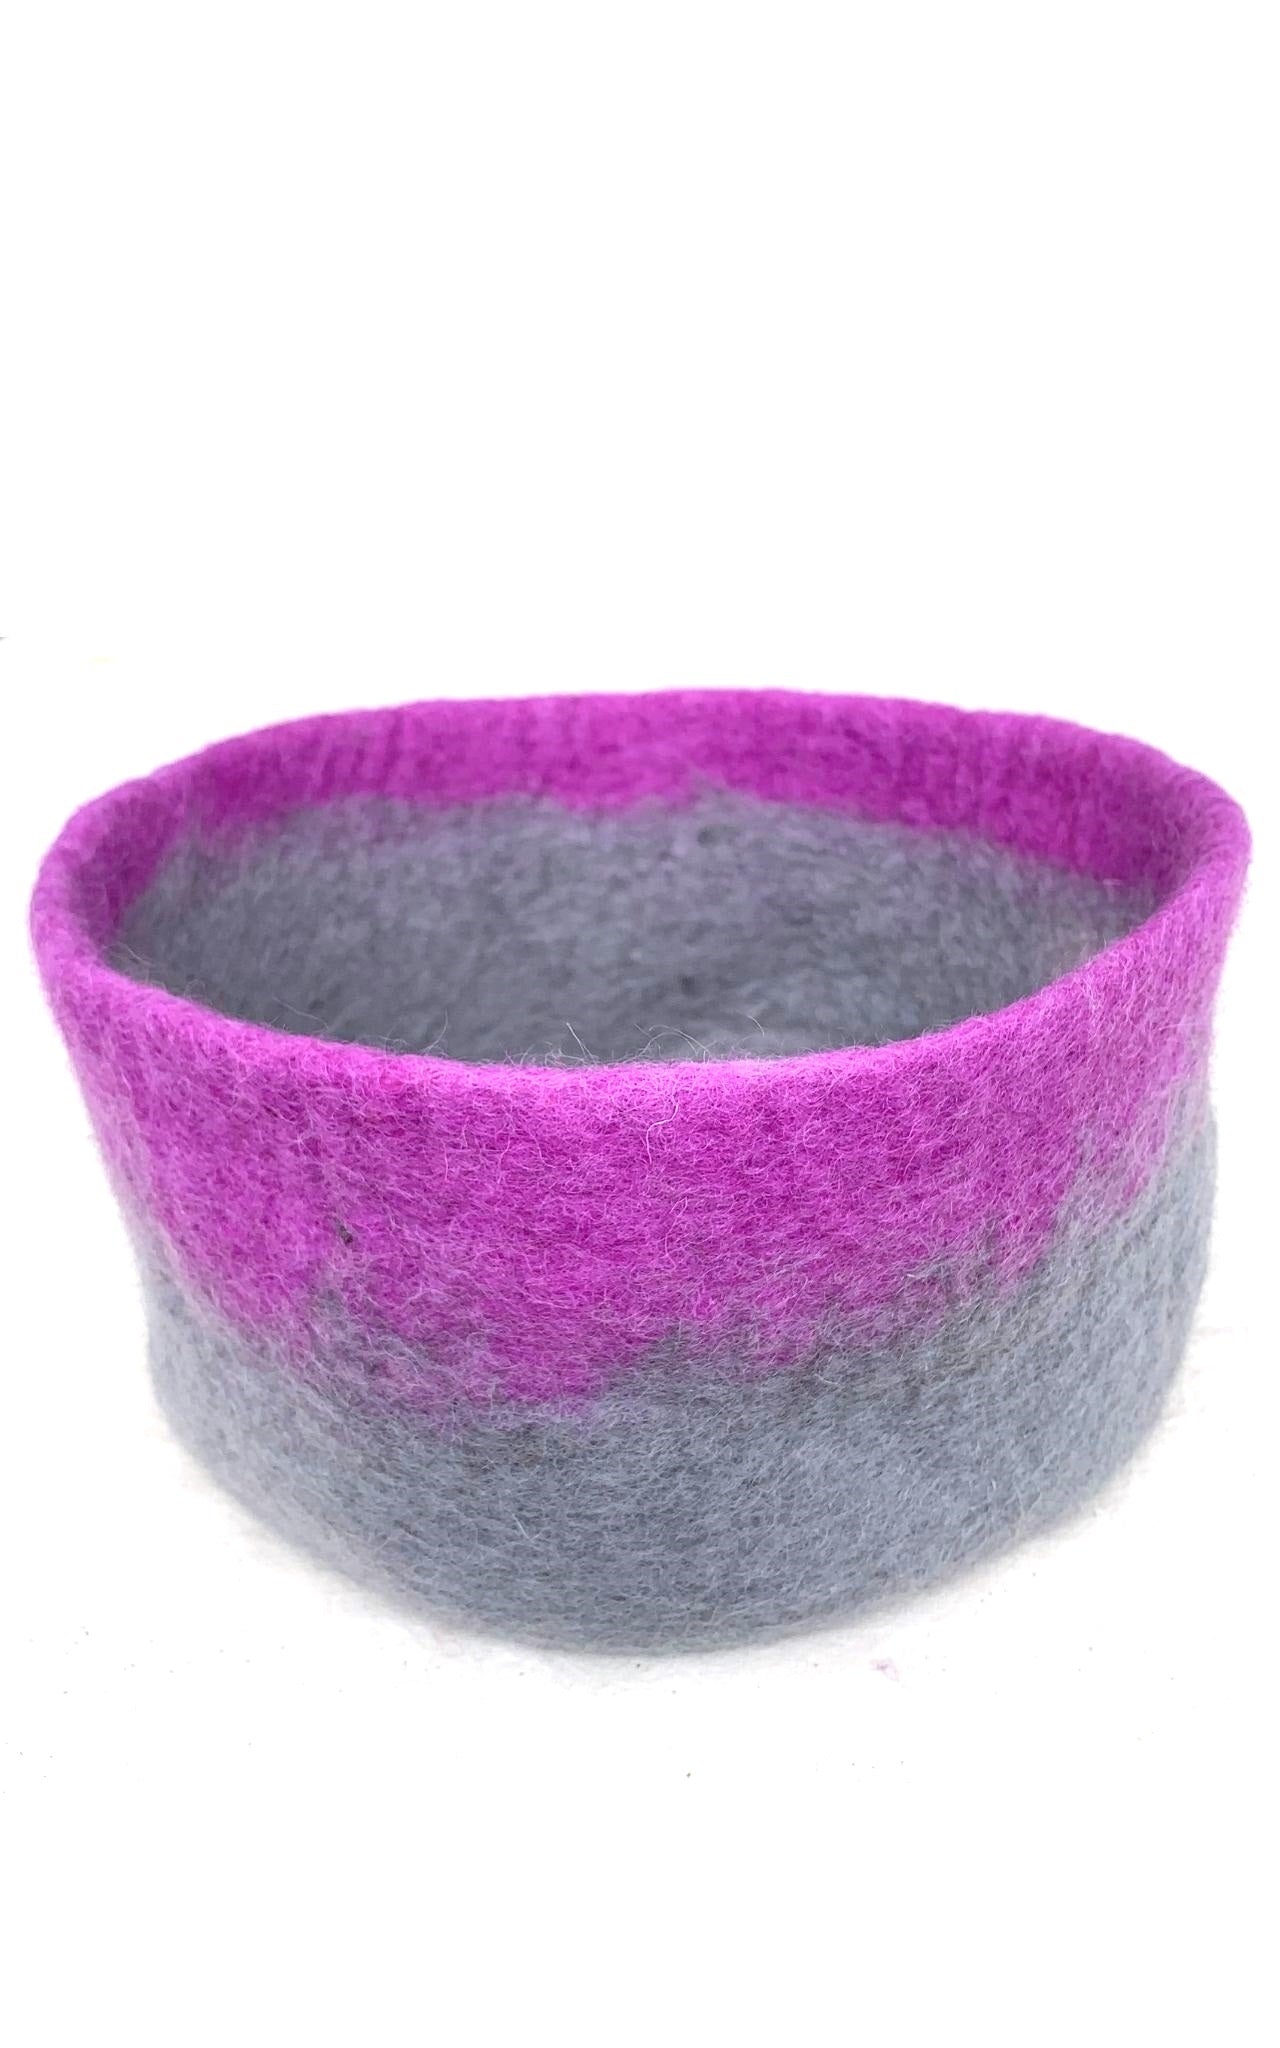 Surya Australia 100% Wool felted Bowls From Nepal - Mulberry